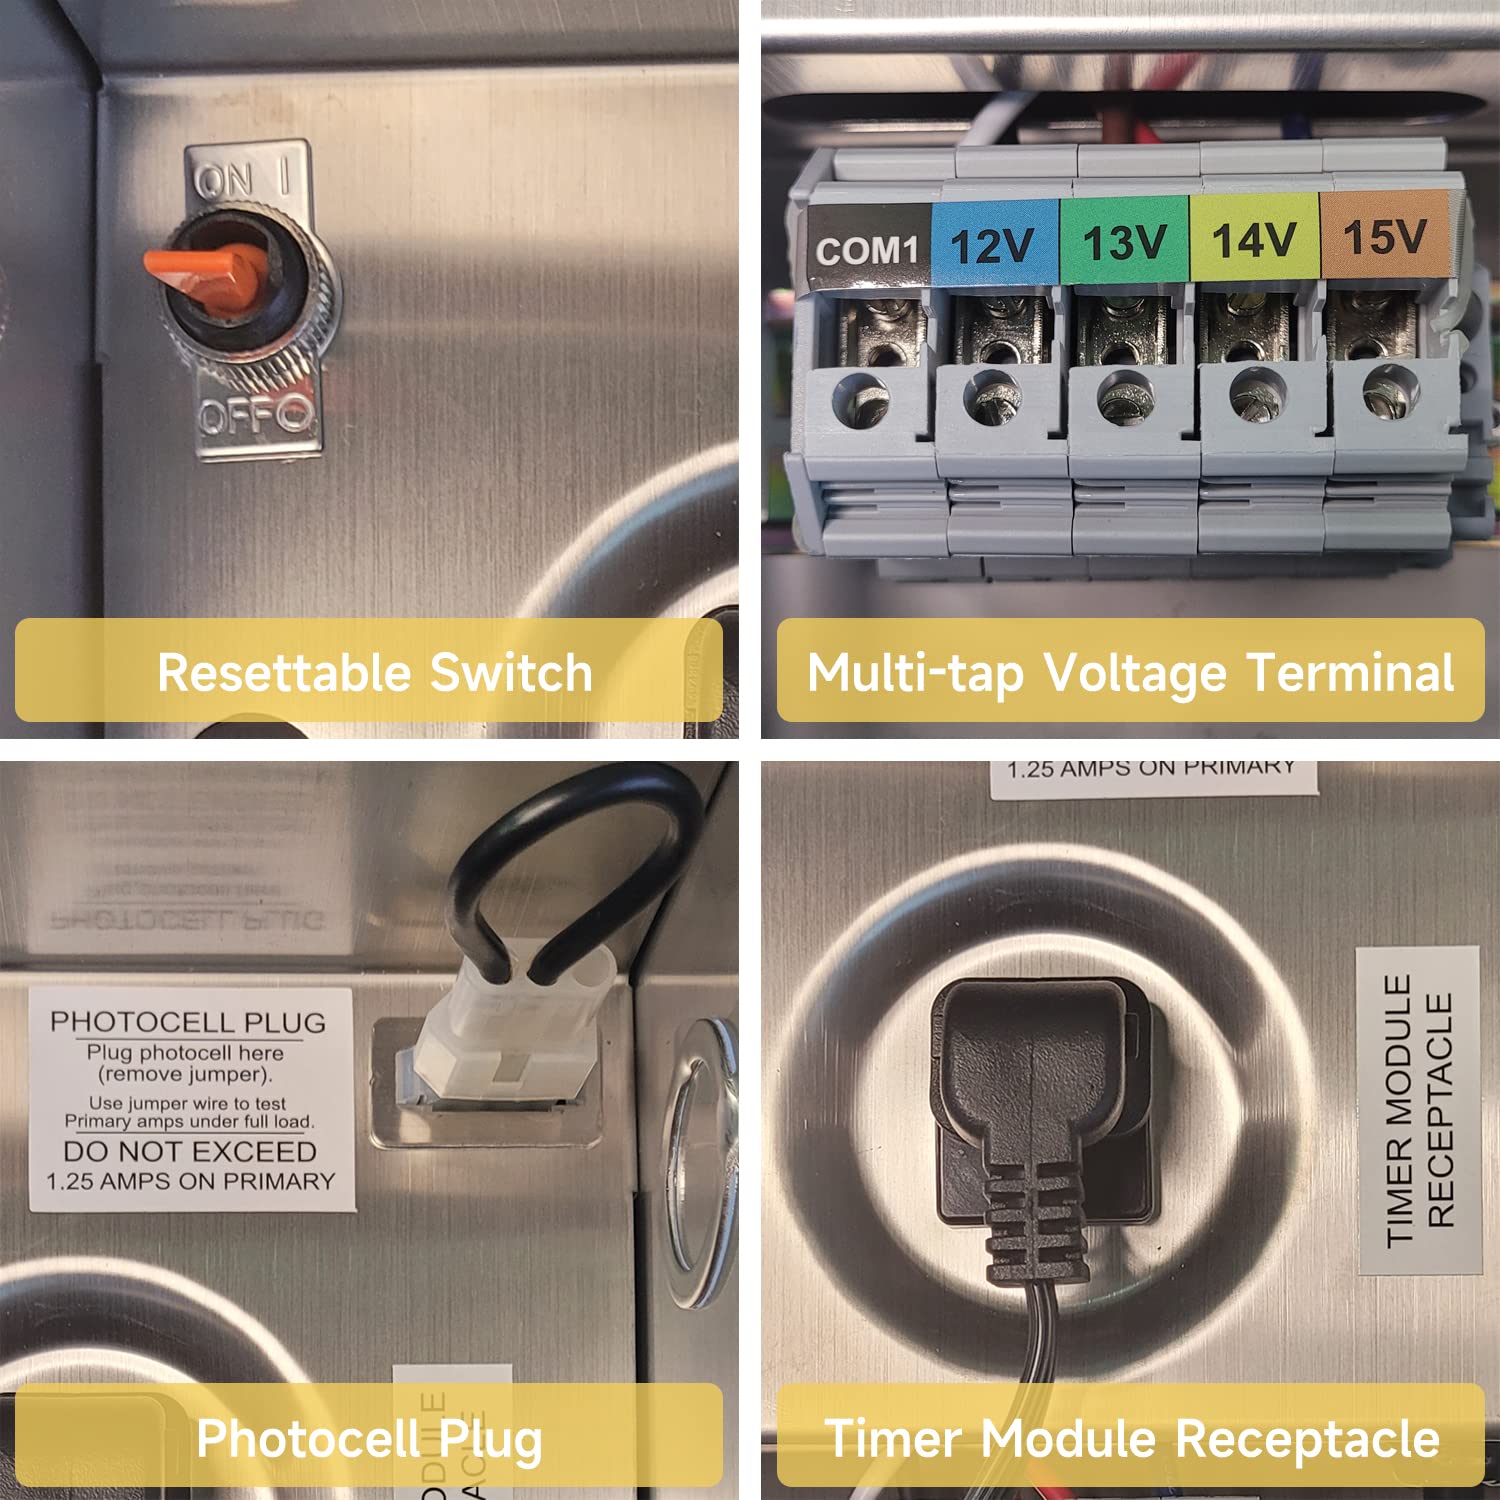 Components of 300W Multi-Tap Low Voltage Transformer COT705S showing resettable switch, multi-tap voltage terminal, photocell plug, and timer module receptacle.